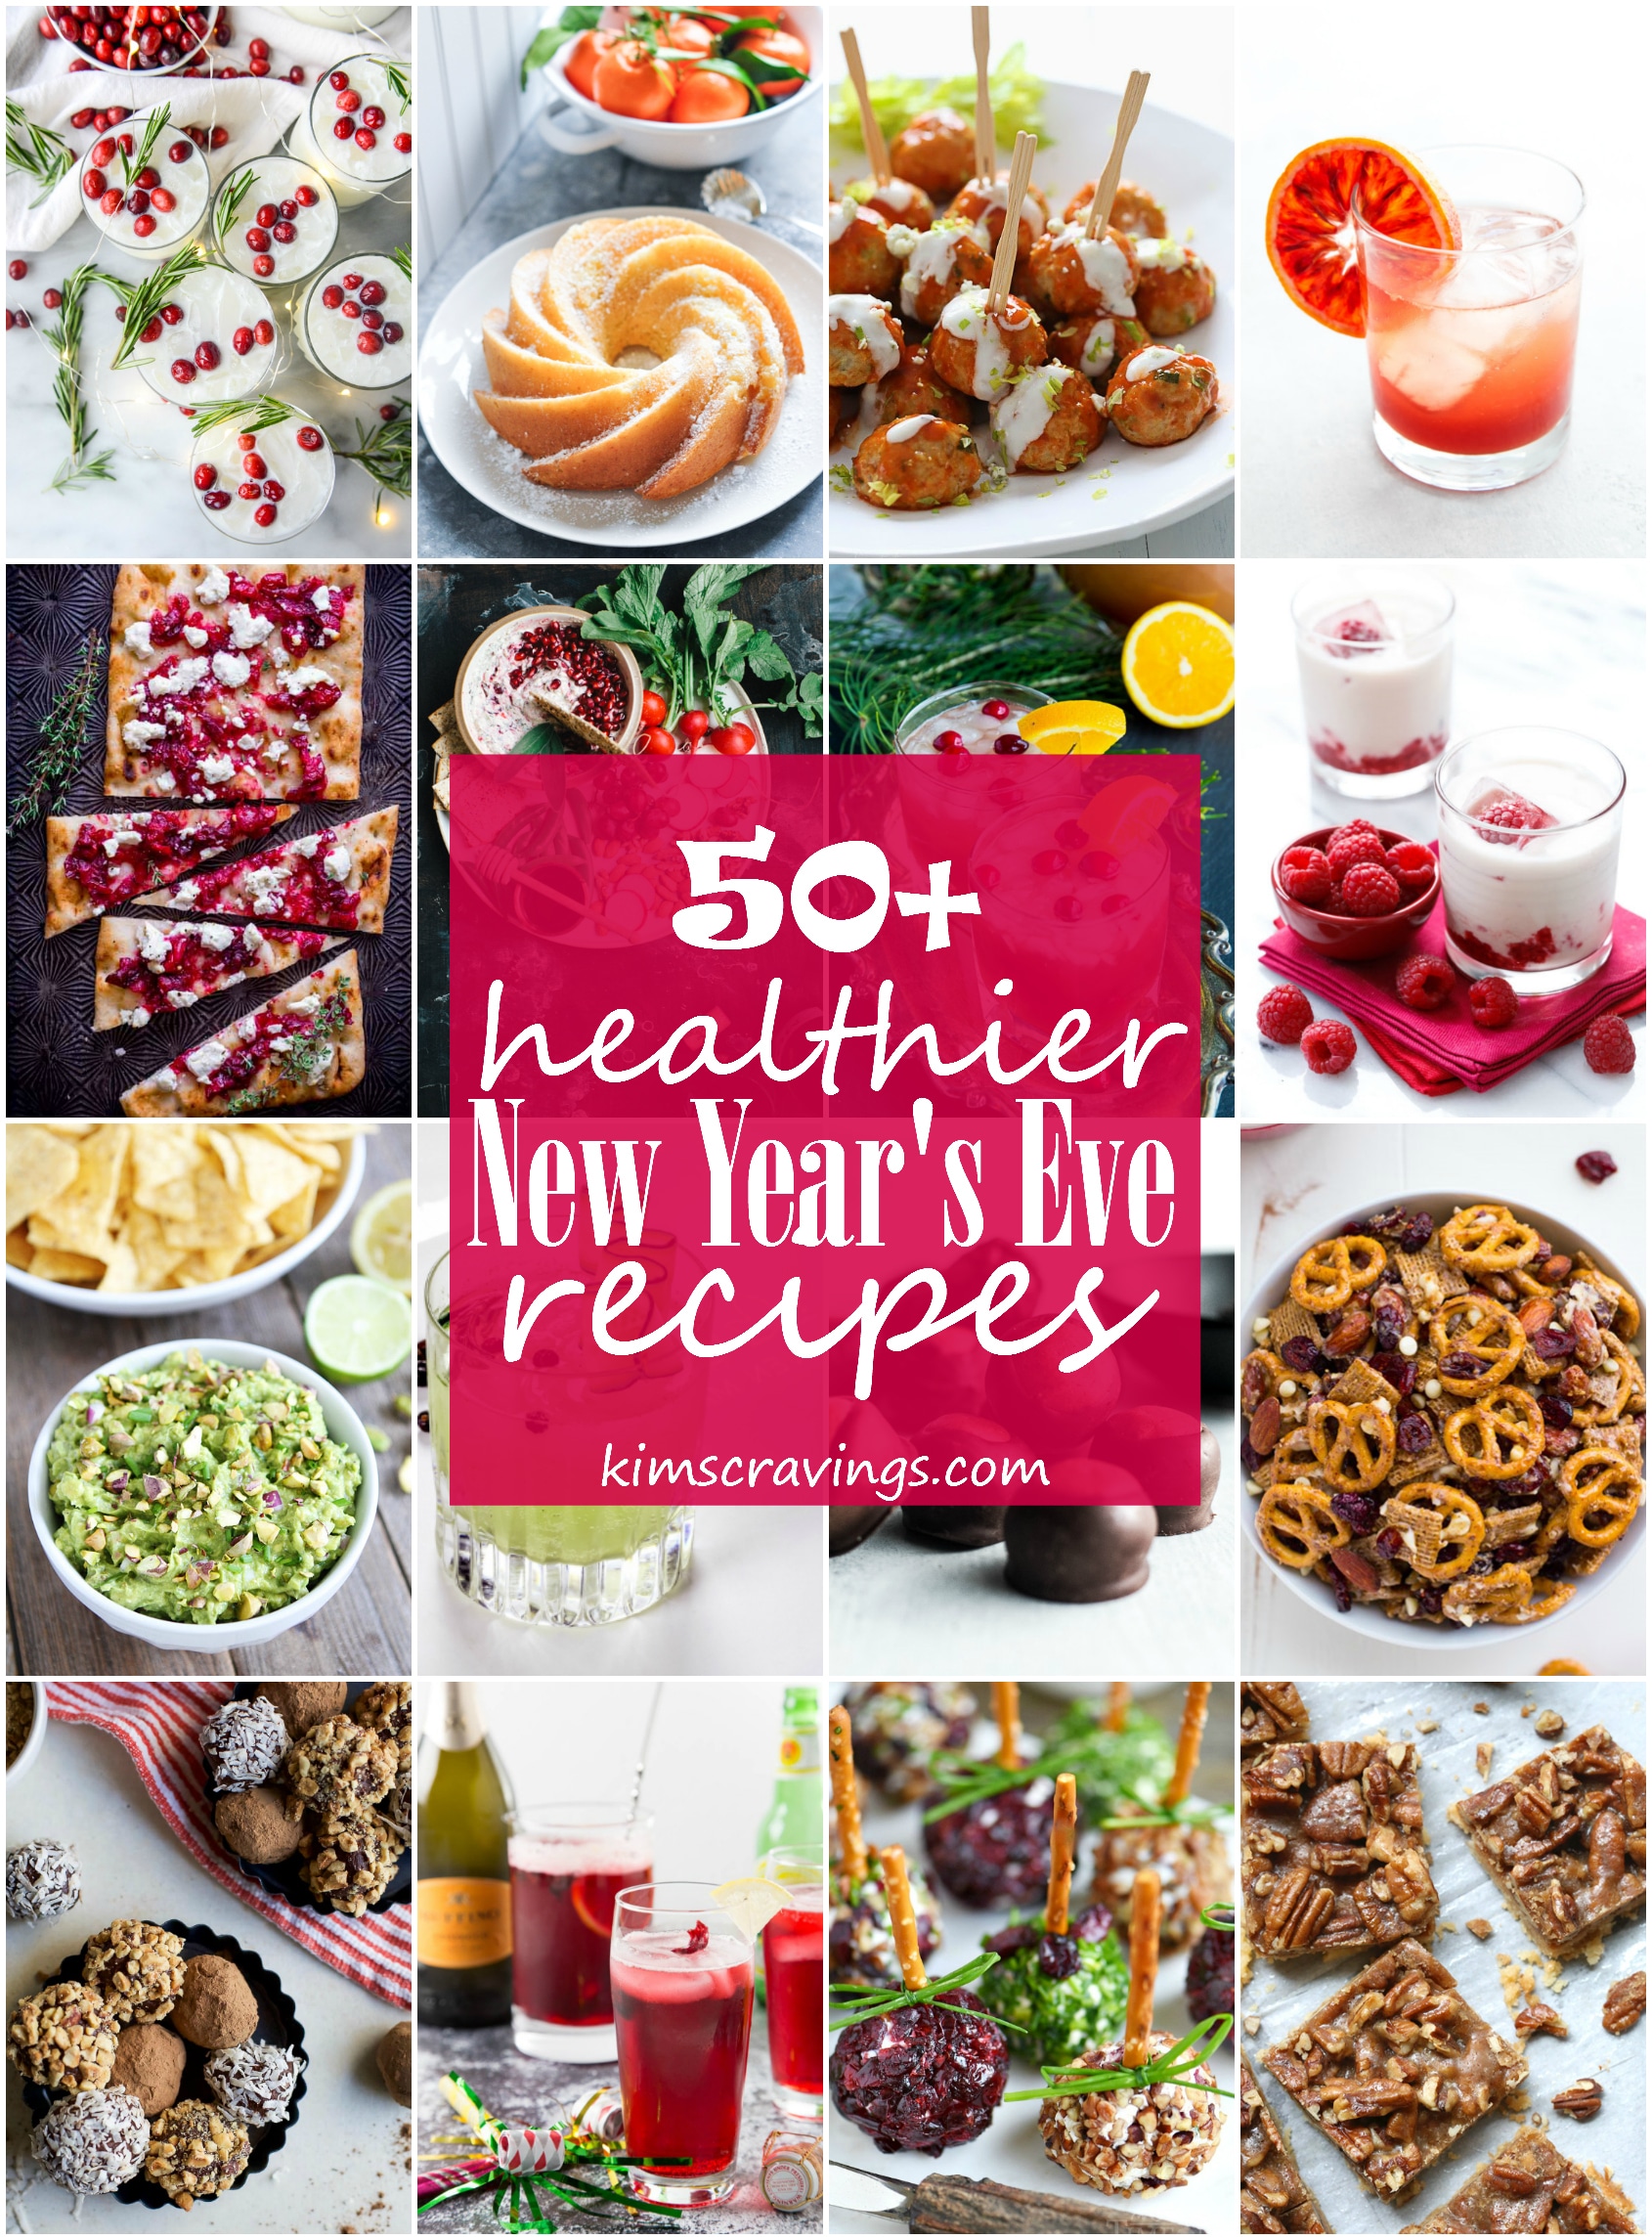 The Ultimate Healthy New Year's Eve Menu - Kim's Cravings